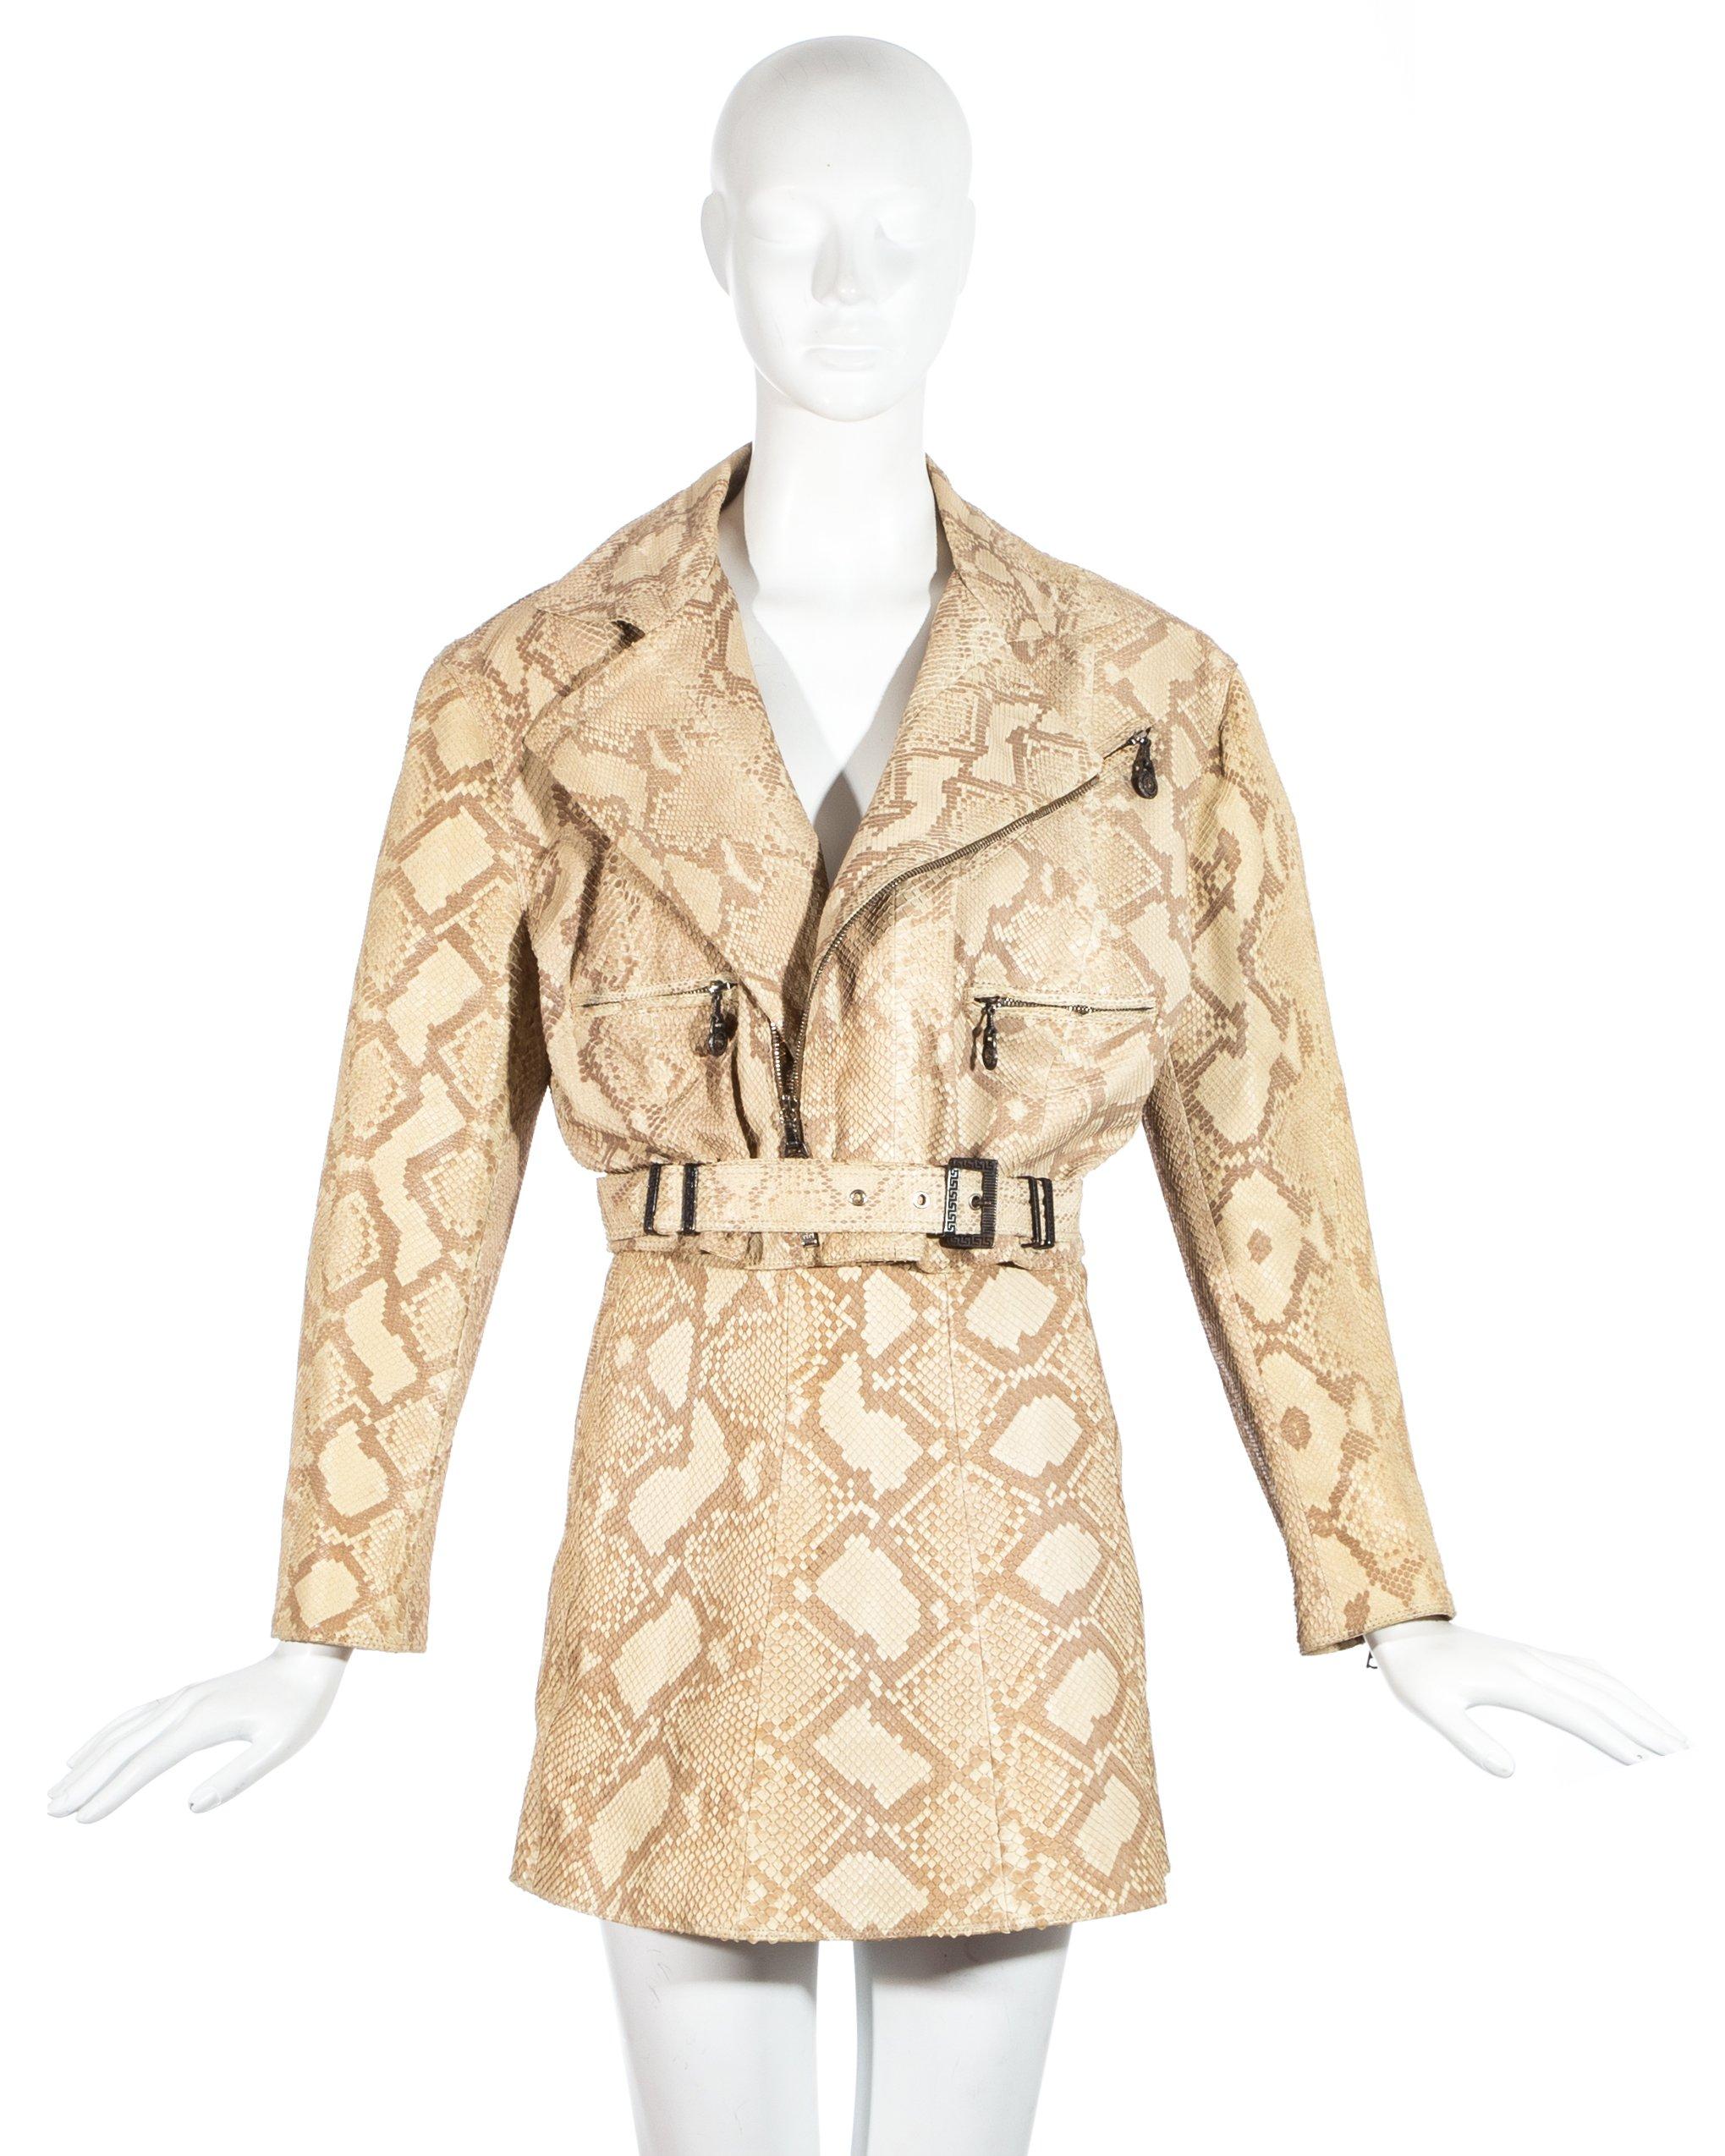 Gianni Versace; cream snakeskin leather biker jacket and mini skirt. Cropped biker jacket with silk Medusa lining and metal buckle and zip fastenings. High waisted A-Line mini skirt with zip fastening.  

Fall-Winter 1994